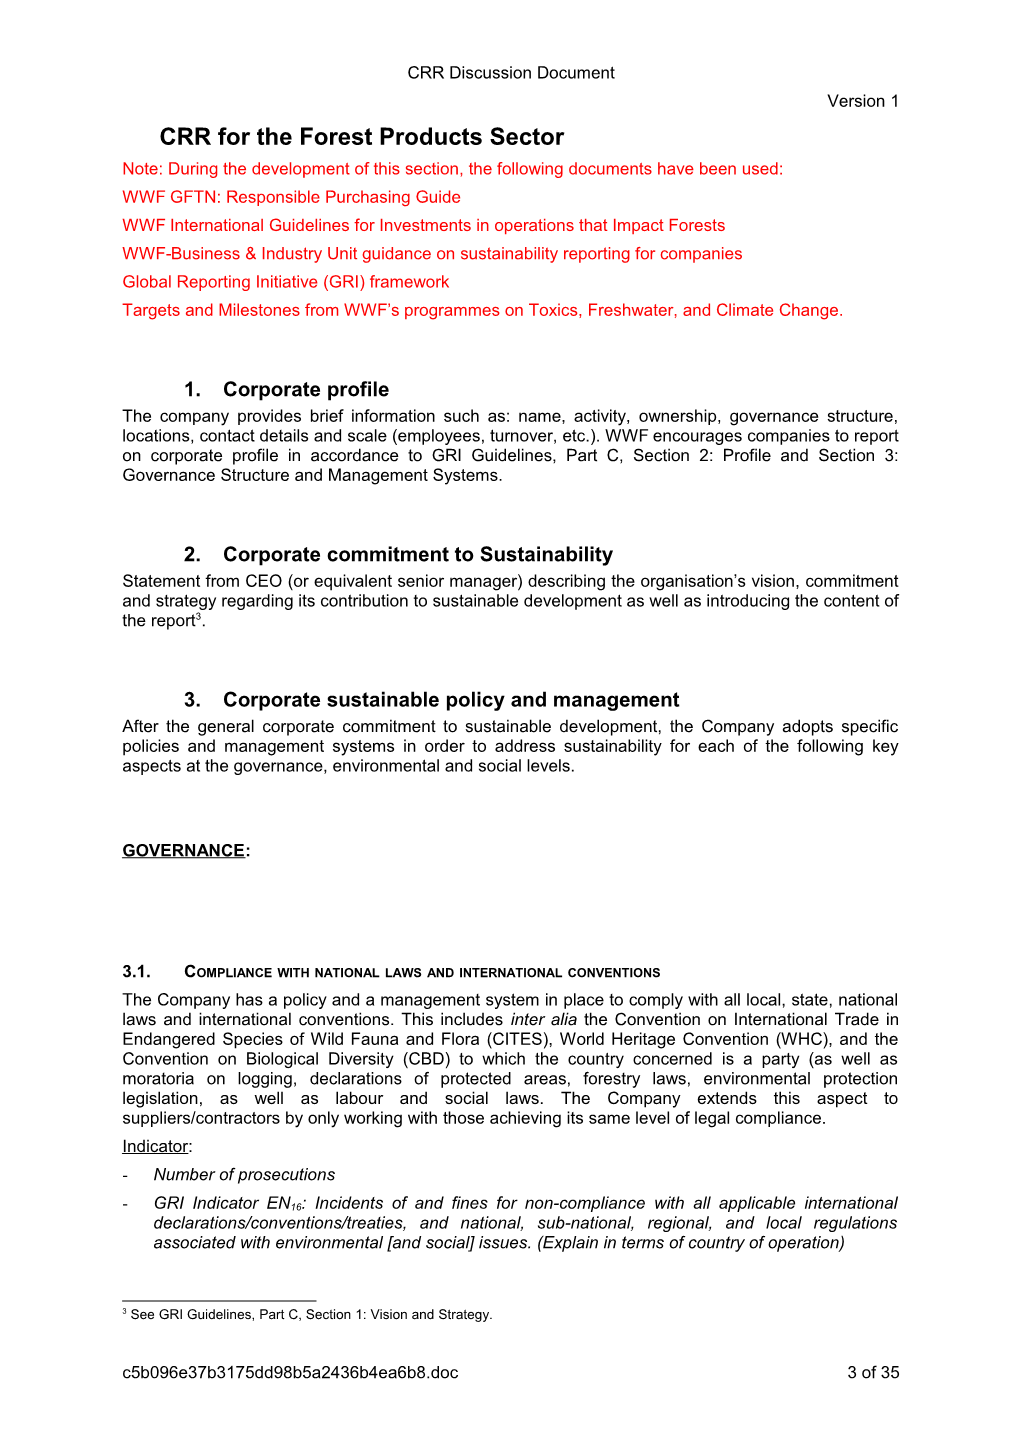 Guidelines on Corporate Responsibility Reporting for the Forest Industry, Pulp and Paper Sector